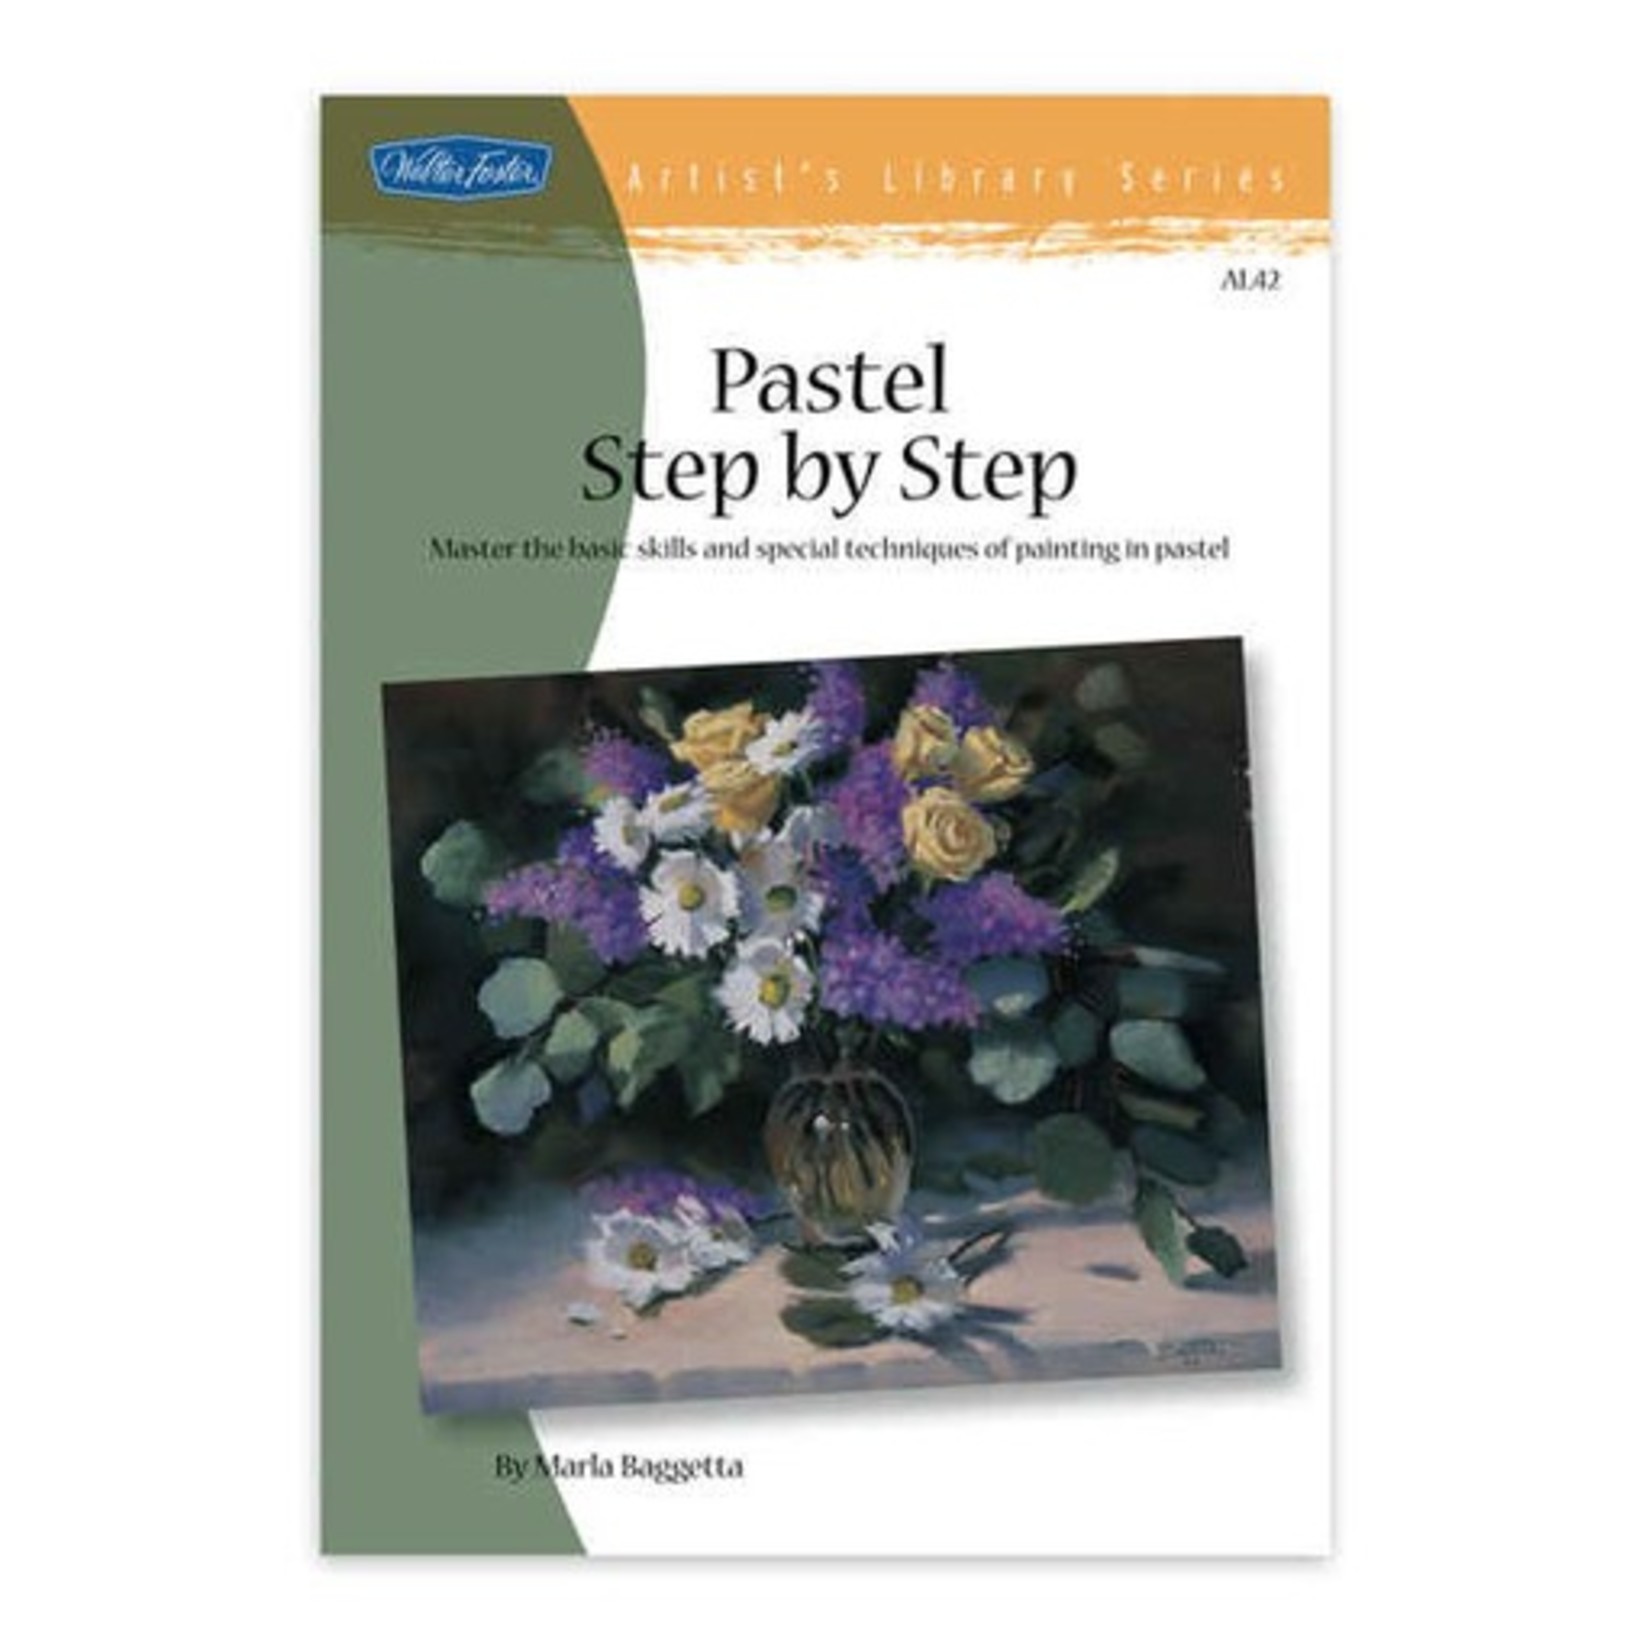 WALTER FOSTER WALTER FOSTER PASTEL STEP BY STEP ARTIST'S LIBRARY SERIES